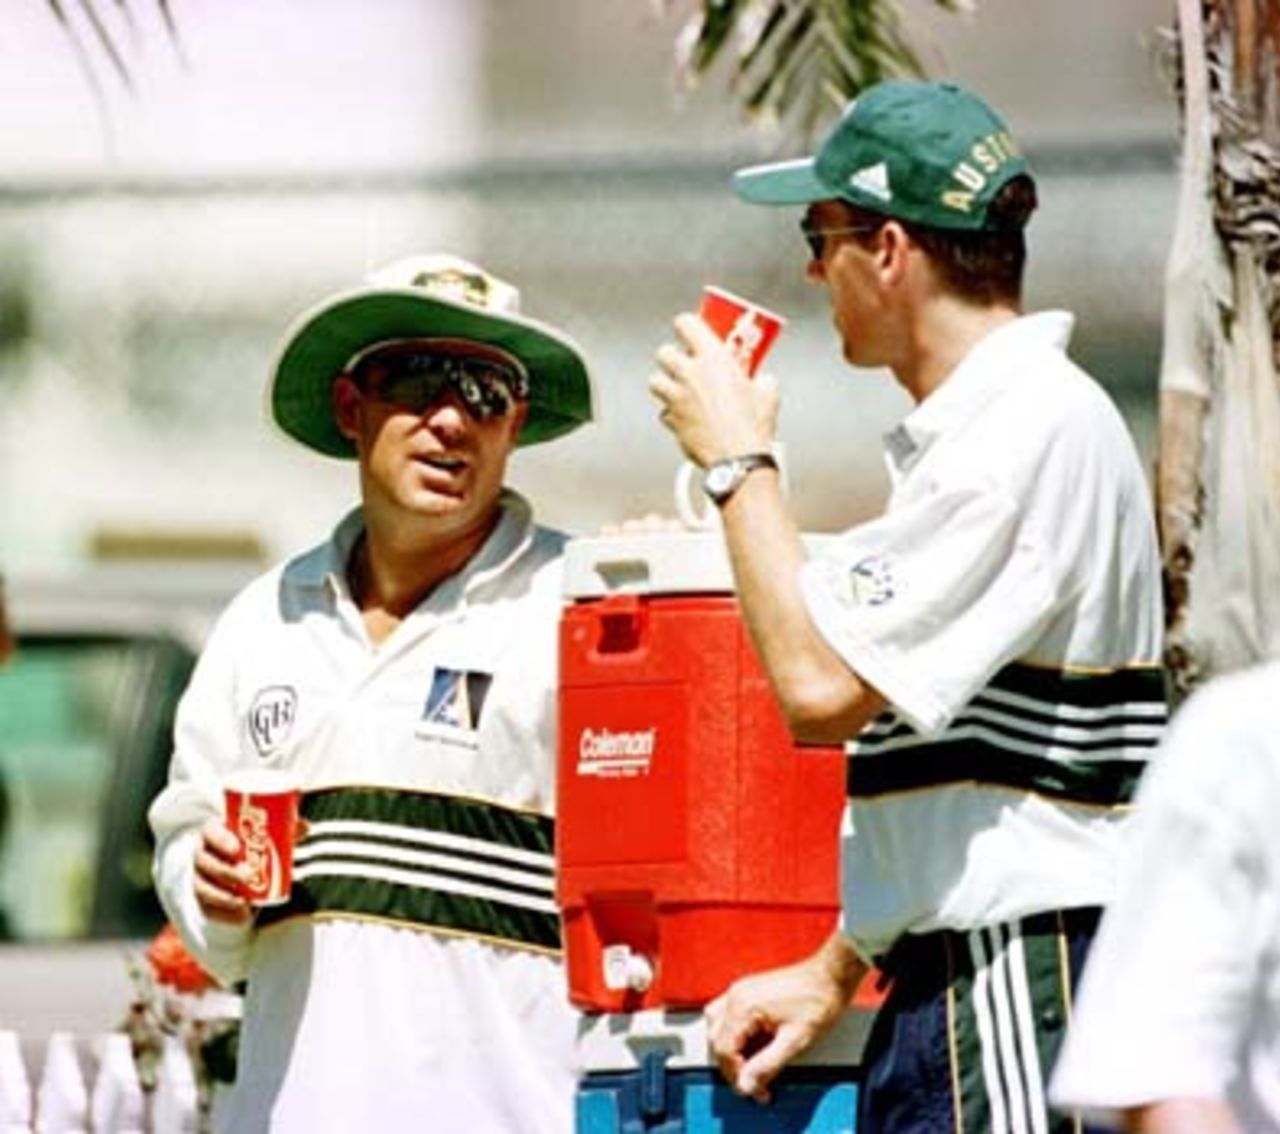 Shane Warne chats at the water cooler with the injured Glenn McGrath. Australian team practice at the WACA, Perth, Wednesday November 19th 1997.